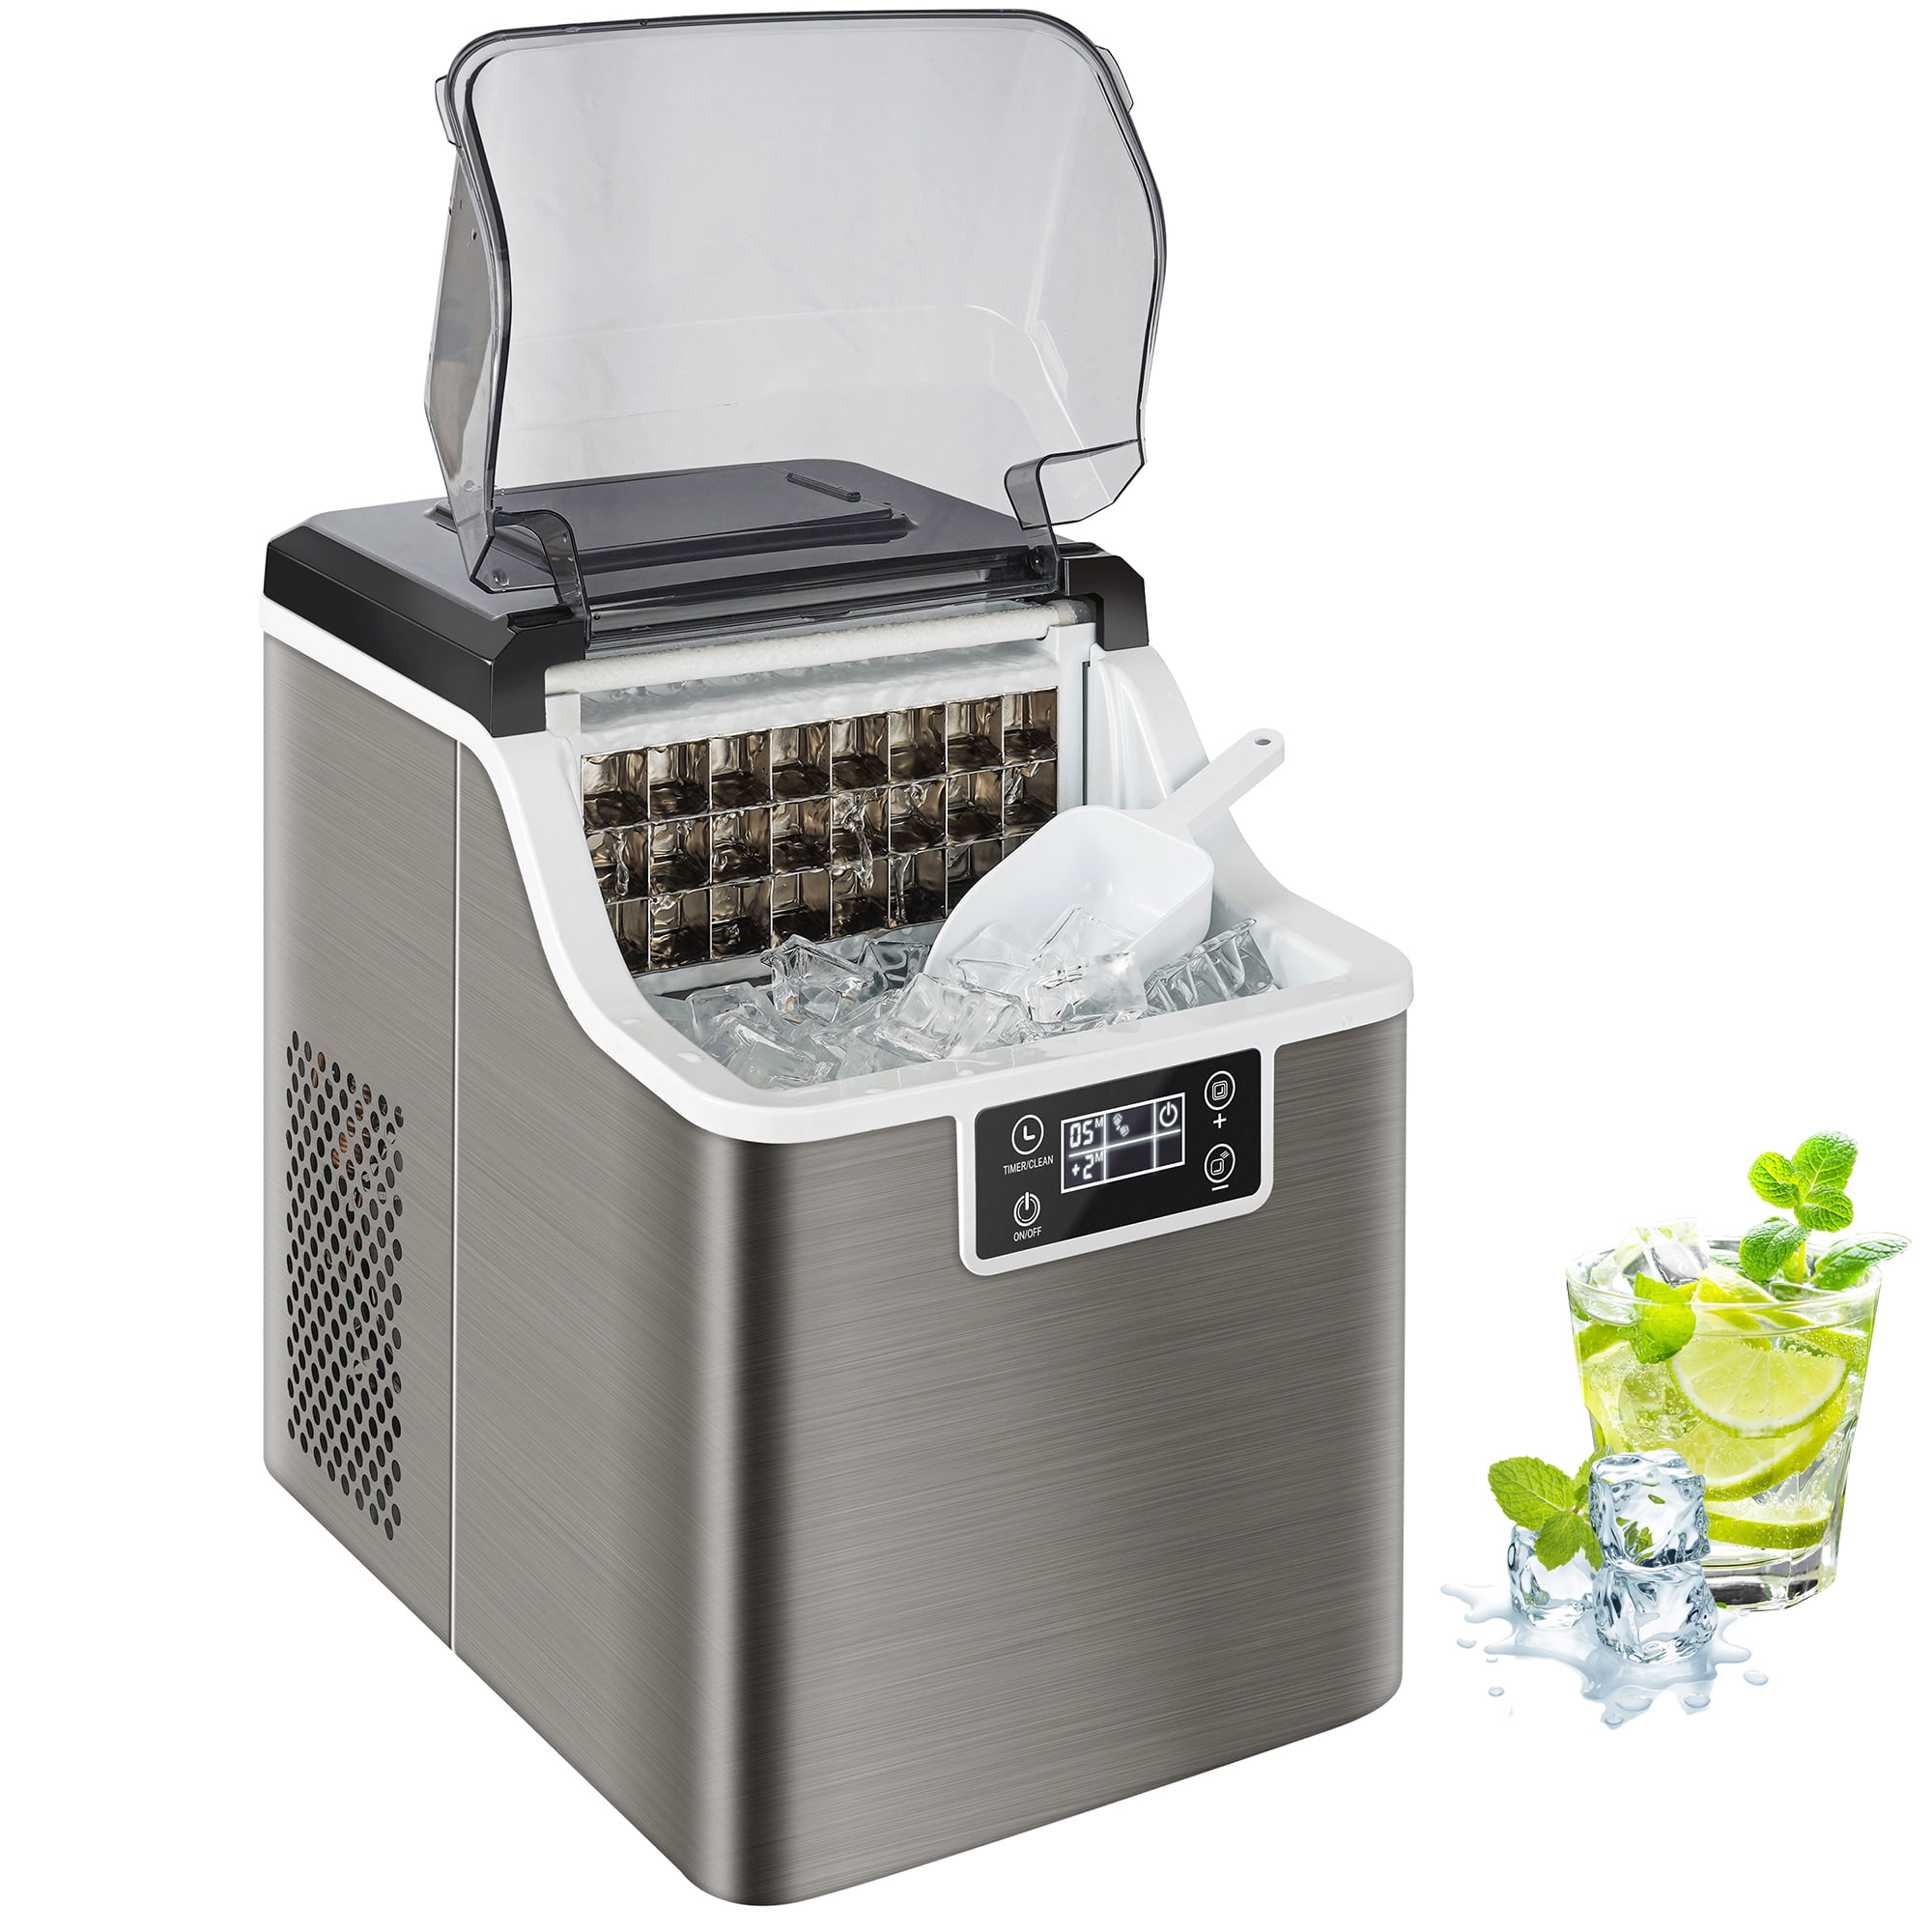 COWSAR Countertop Ice Maker, Square Ice Cubes Maker Machine, 2 Ways to Add  Water, Self-Cleaning Maker, 24H Timer Compact for Home Office Party Bar